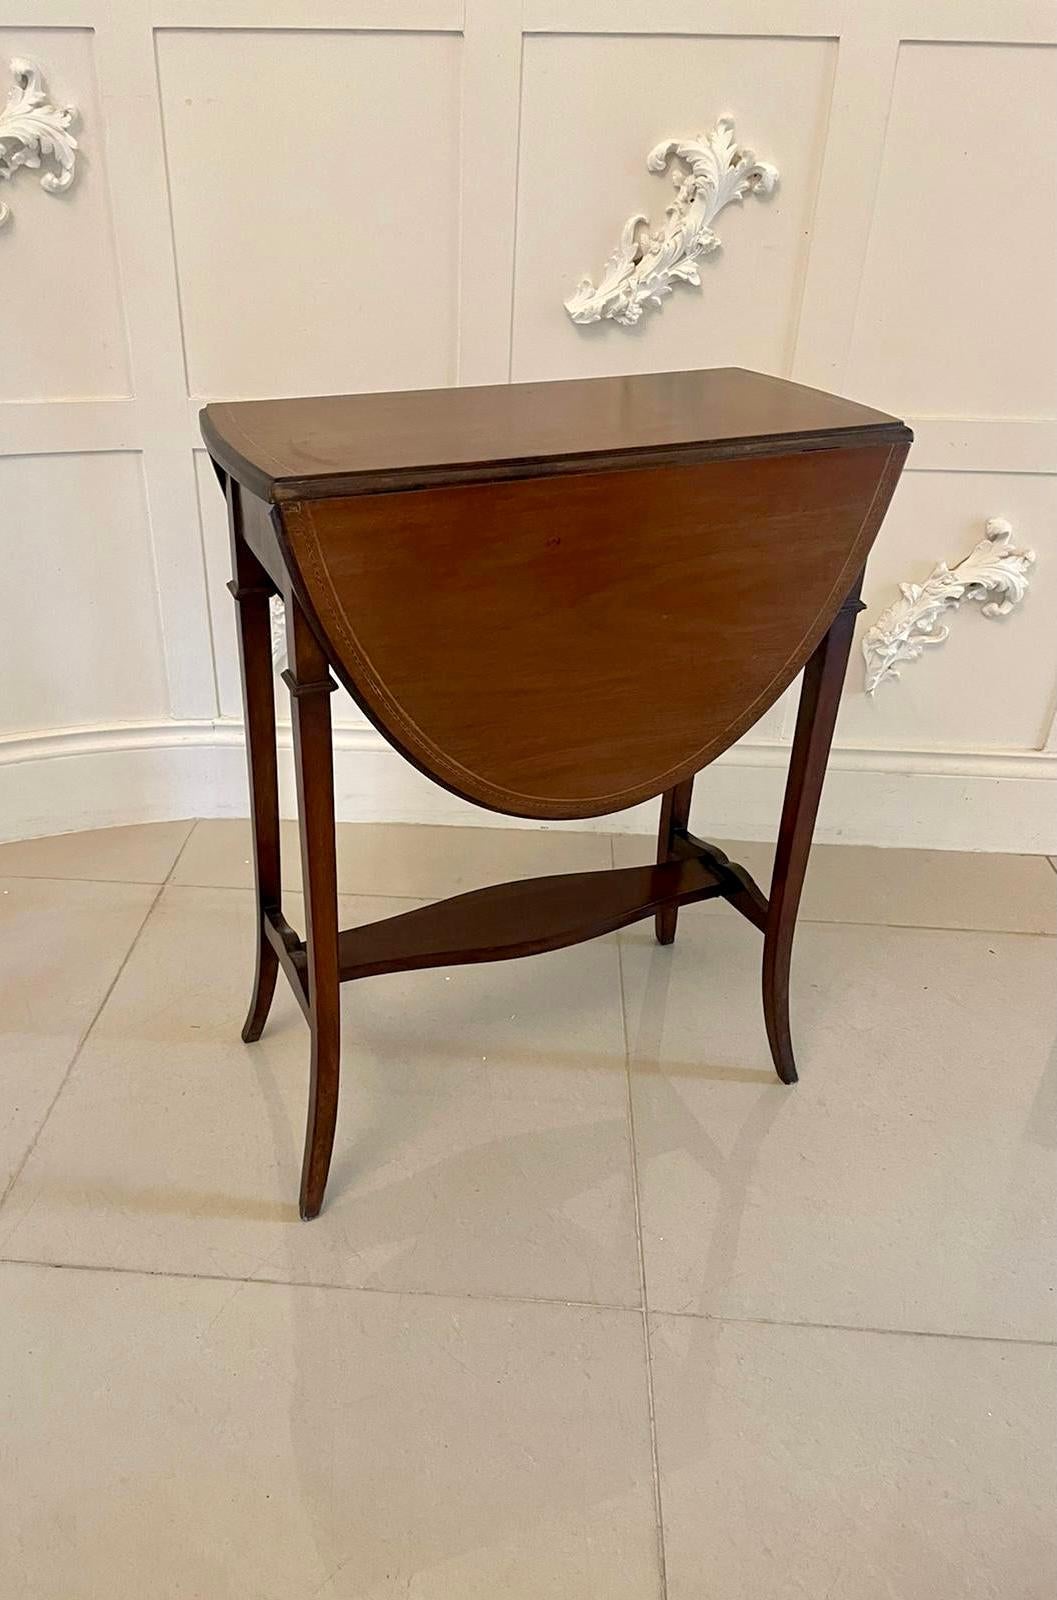 Antique Edwardian Quality Mahogany Inlaid Lamp Table For Sale 1